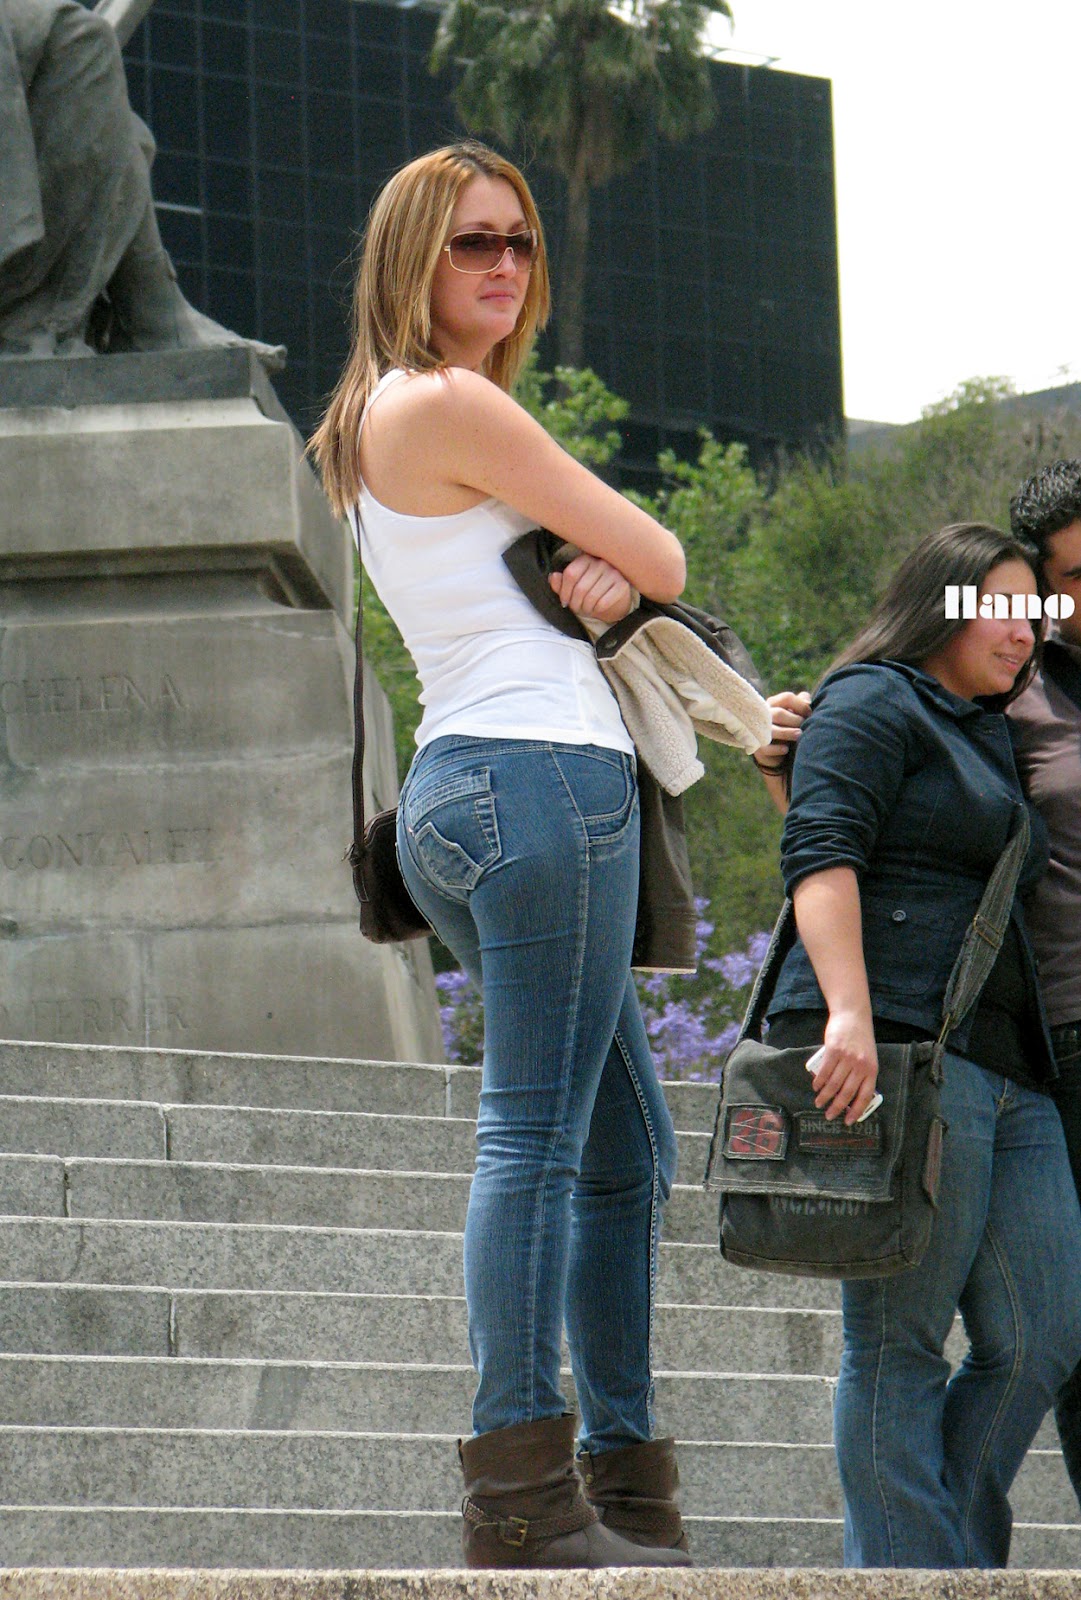 Beautiful Blonde With Tight Jeans Divine Butts Candid Milfs In Public 